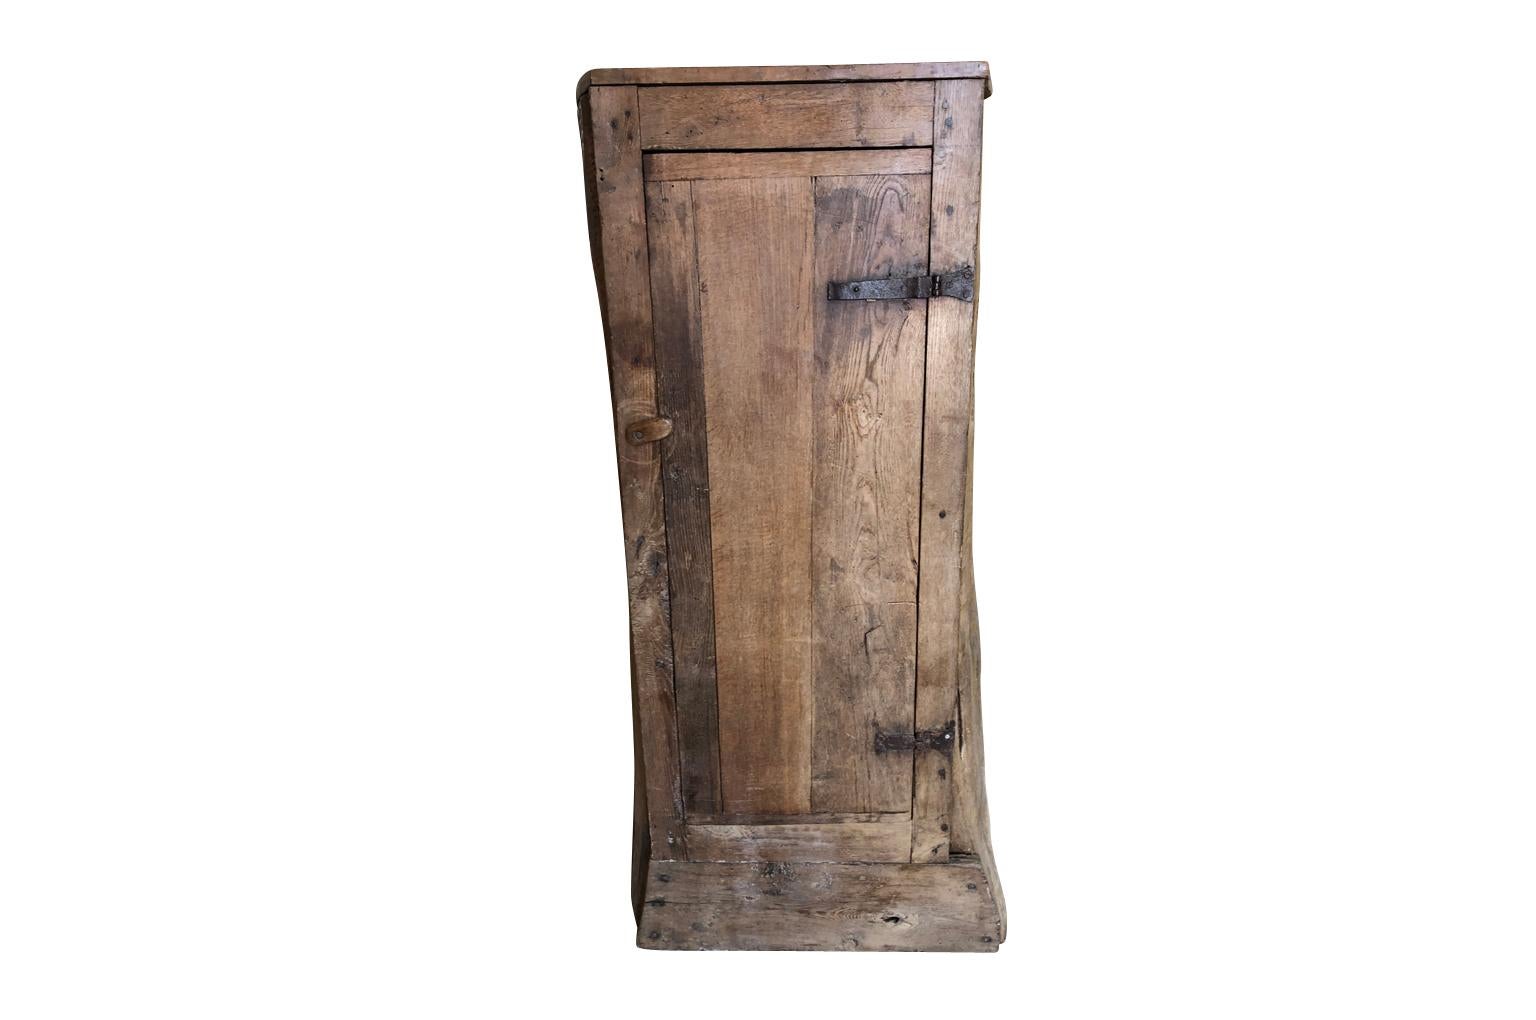 A very charming - Arte Populaire - Folk Art - 18th century French cabinet made from a hollowed out chestnut tree. The interior has shelves and ample storage space. A delightful hand crafted piece perfect for any casual living space.